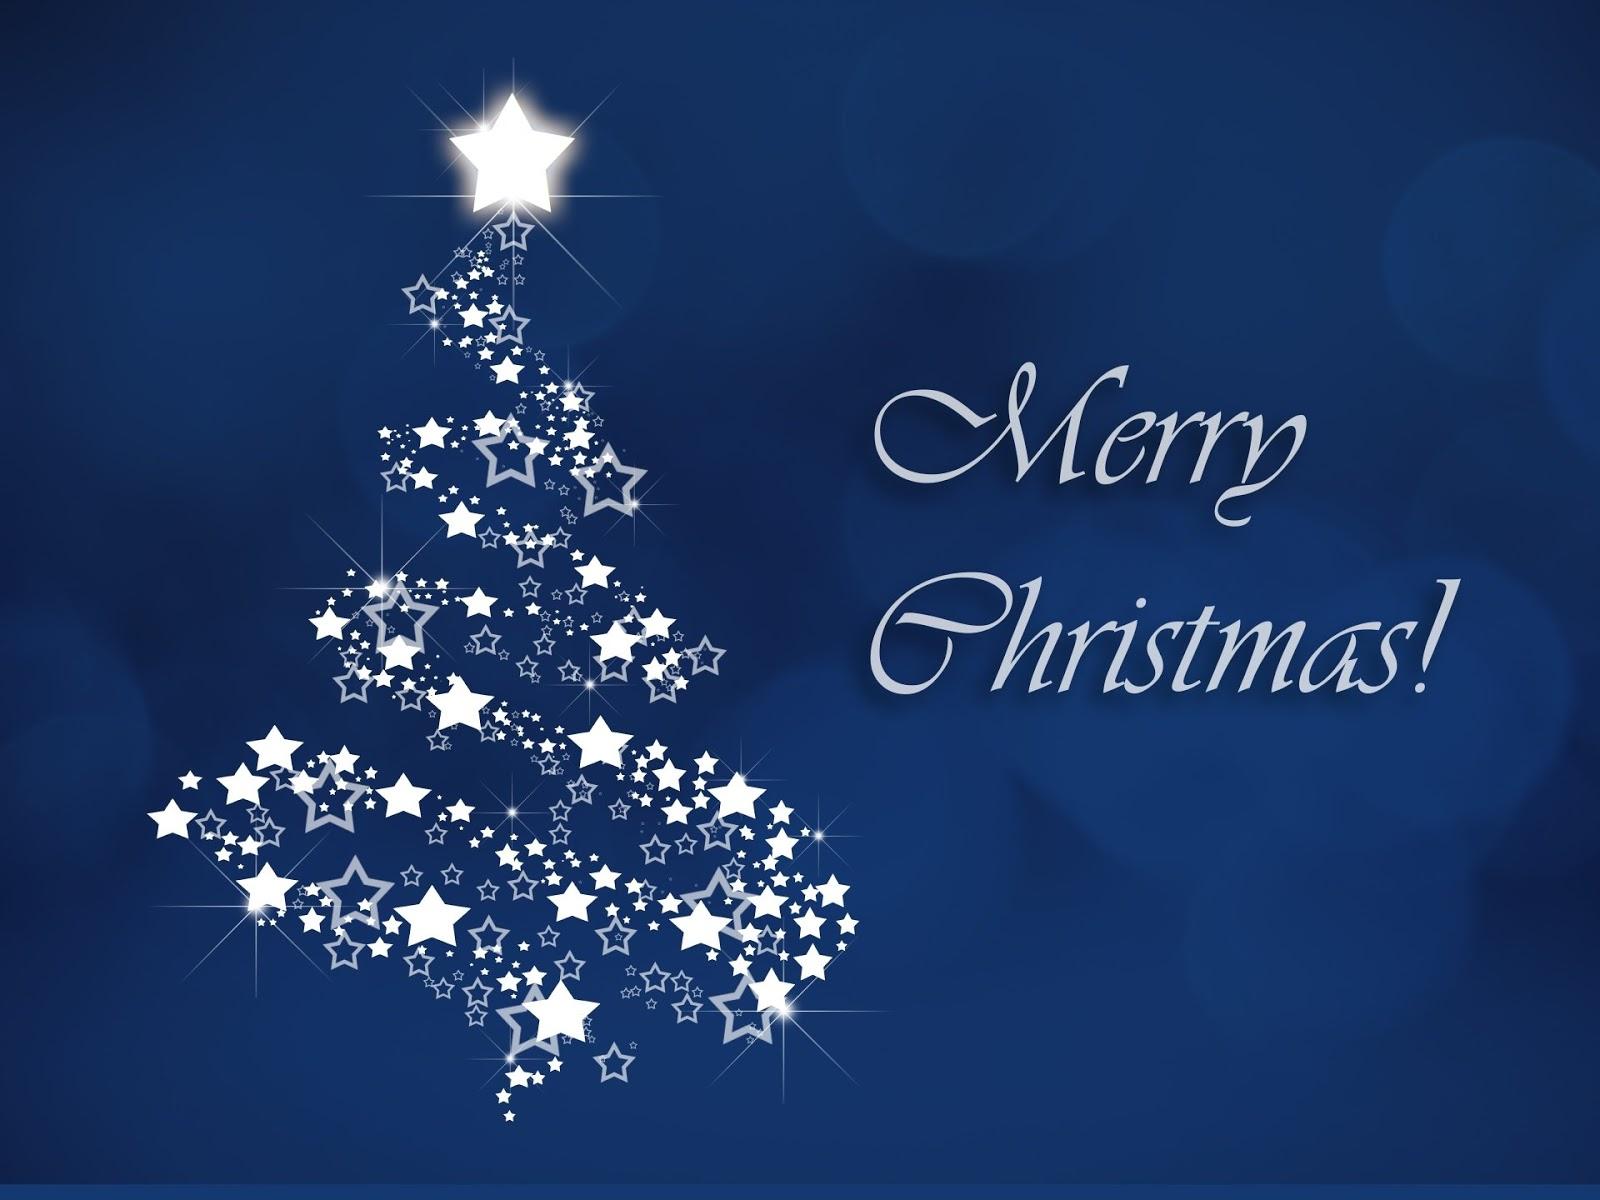 Merry Christmas & Happy New Year 2020 Image.